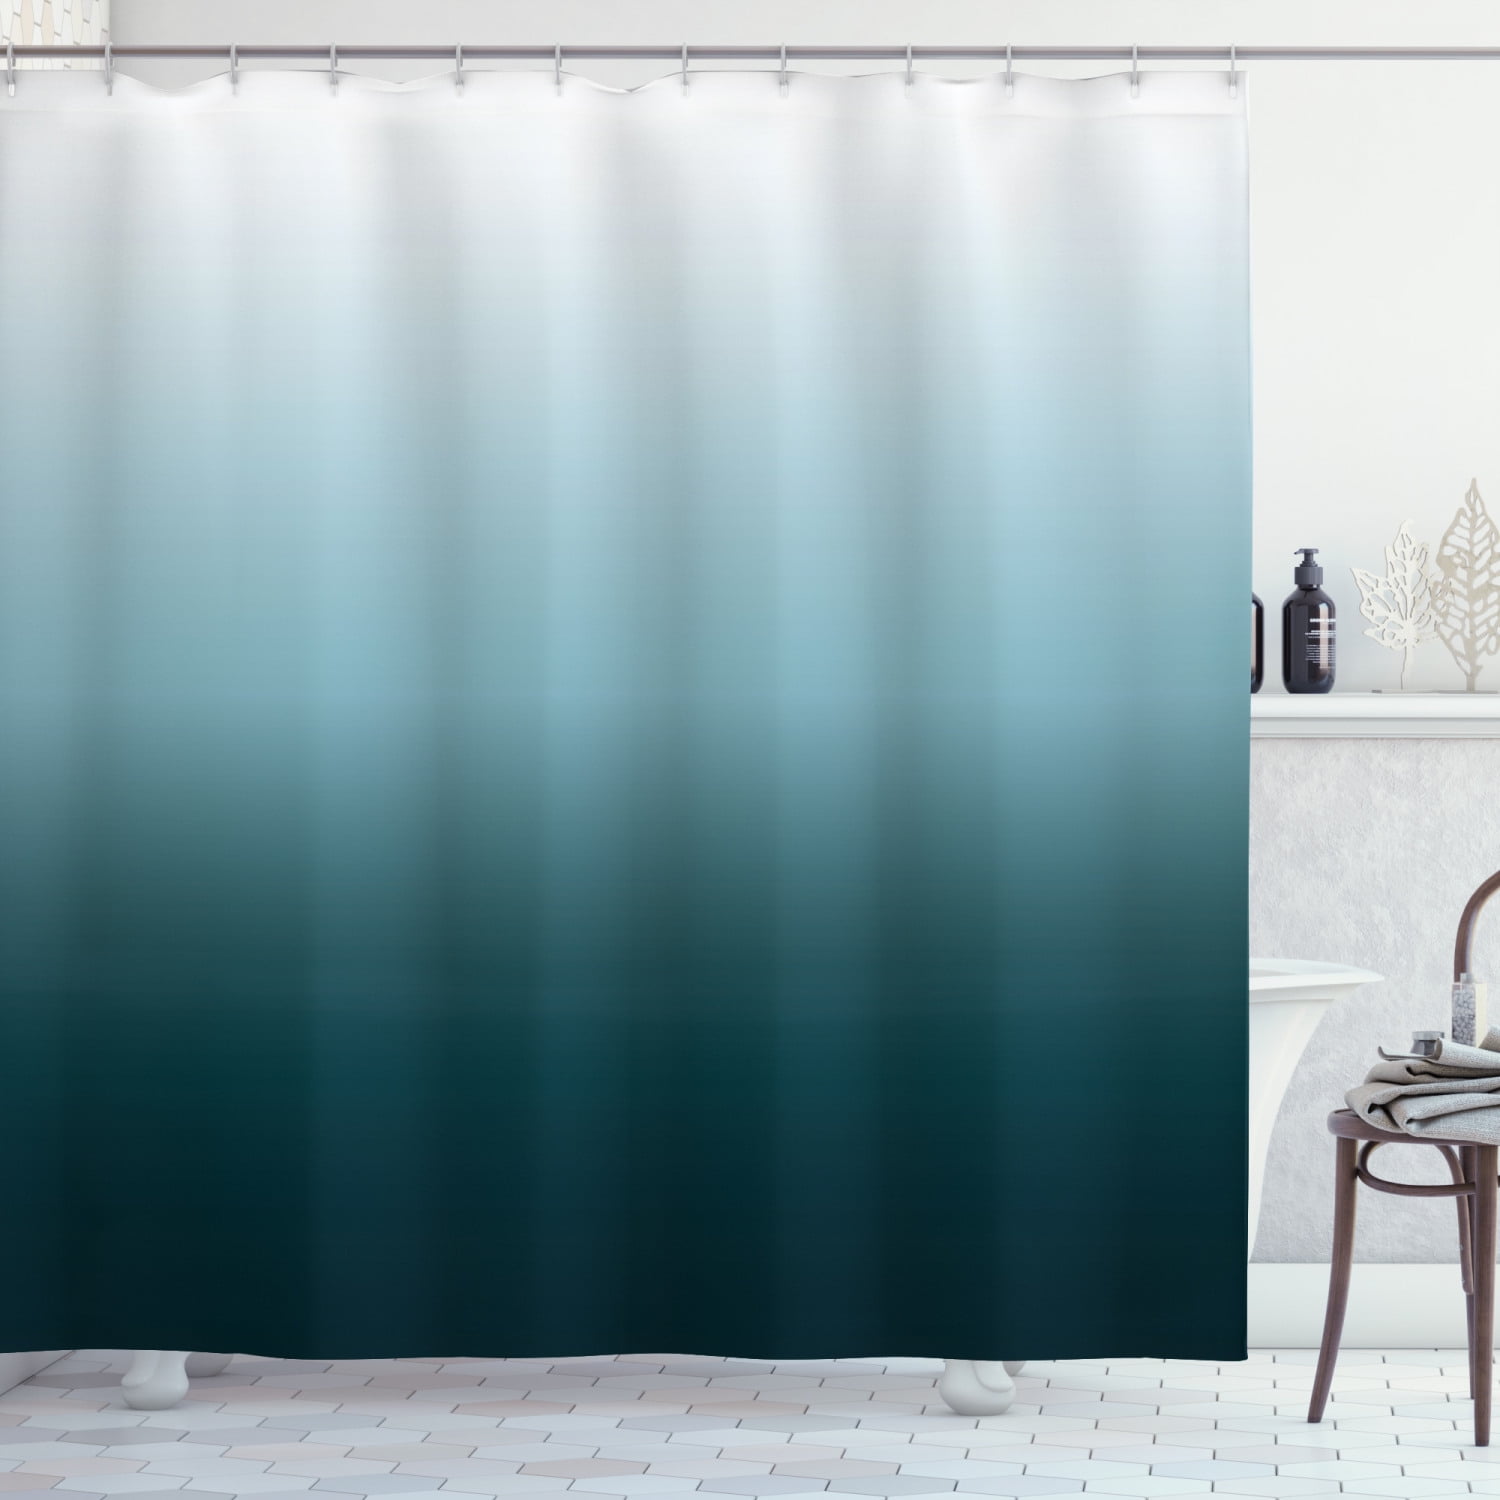 Ambesonne Ombre Shower Curtain, Teal Shades Design, 69Wx84L